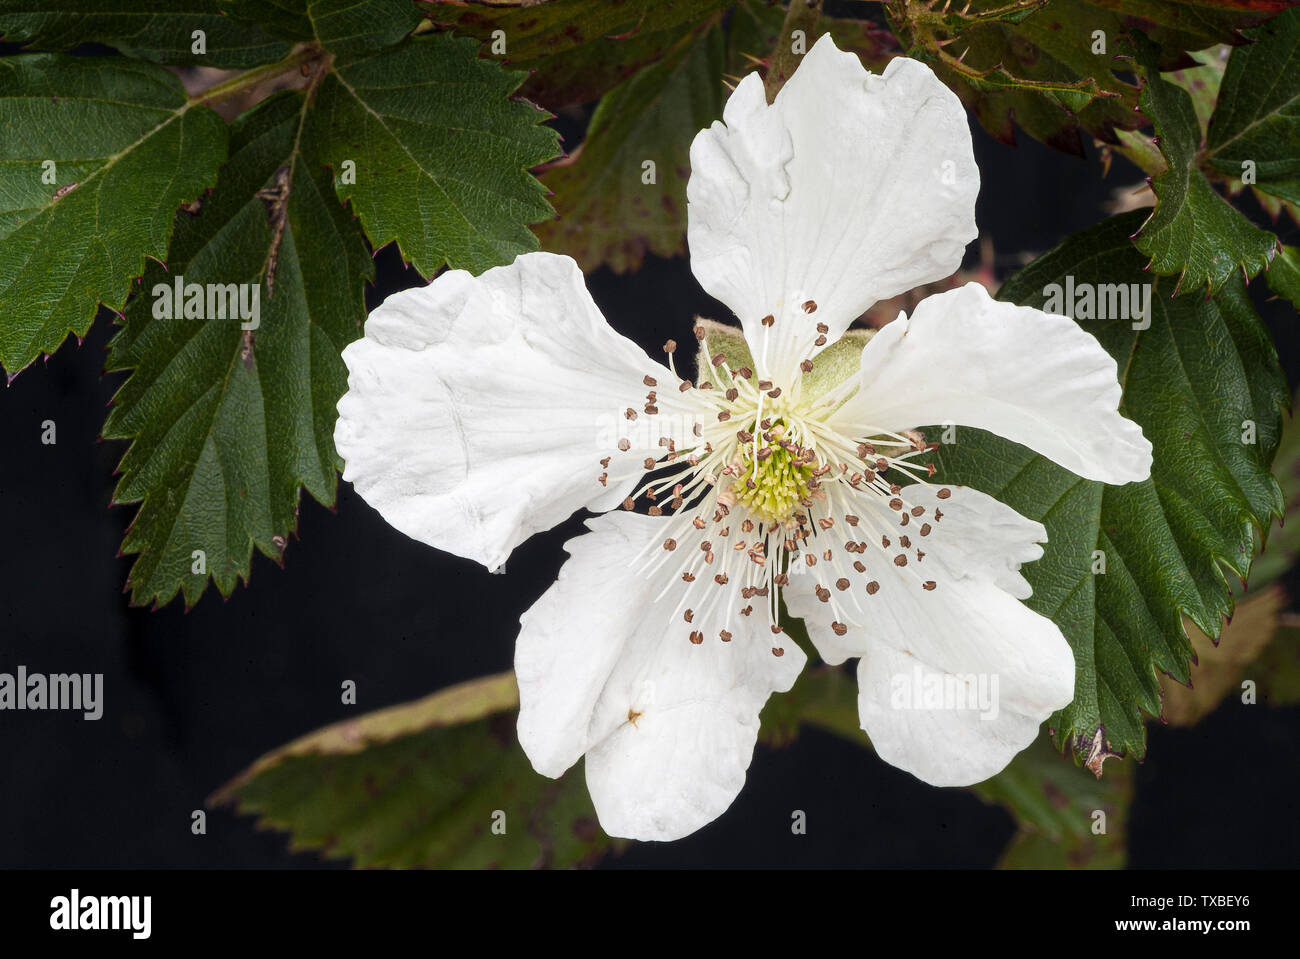 Closeup image of a white blackberry flower taken outdoors on the bush showing leaves and stamens Stock Photo